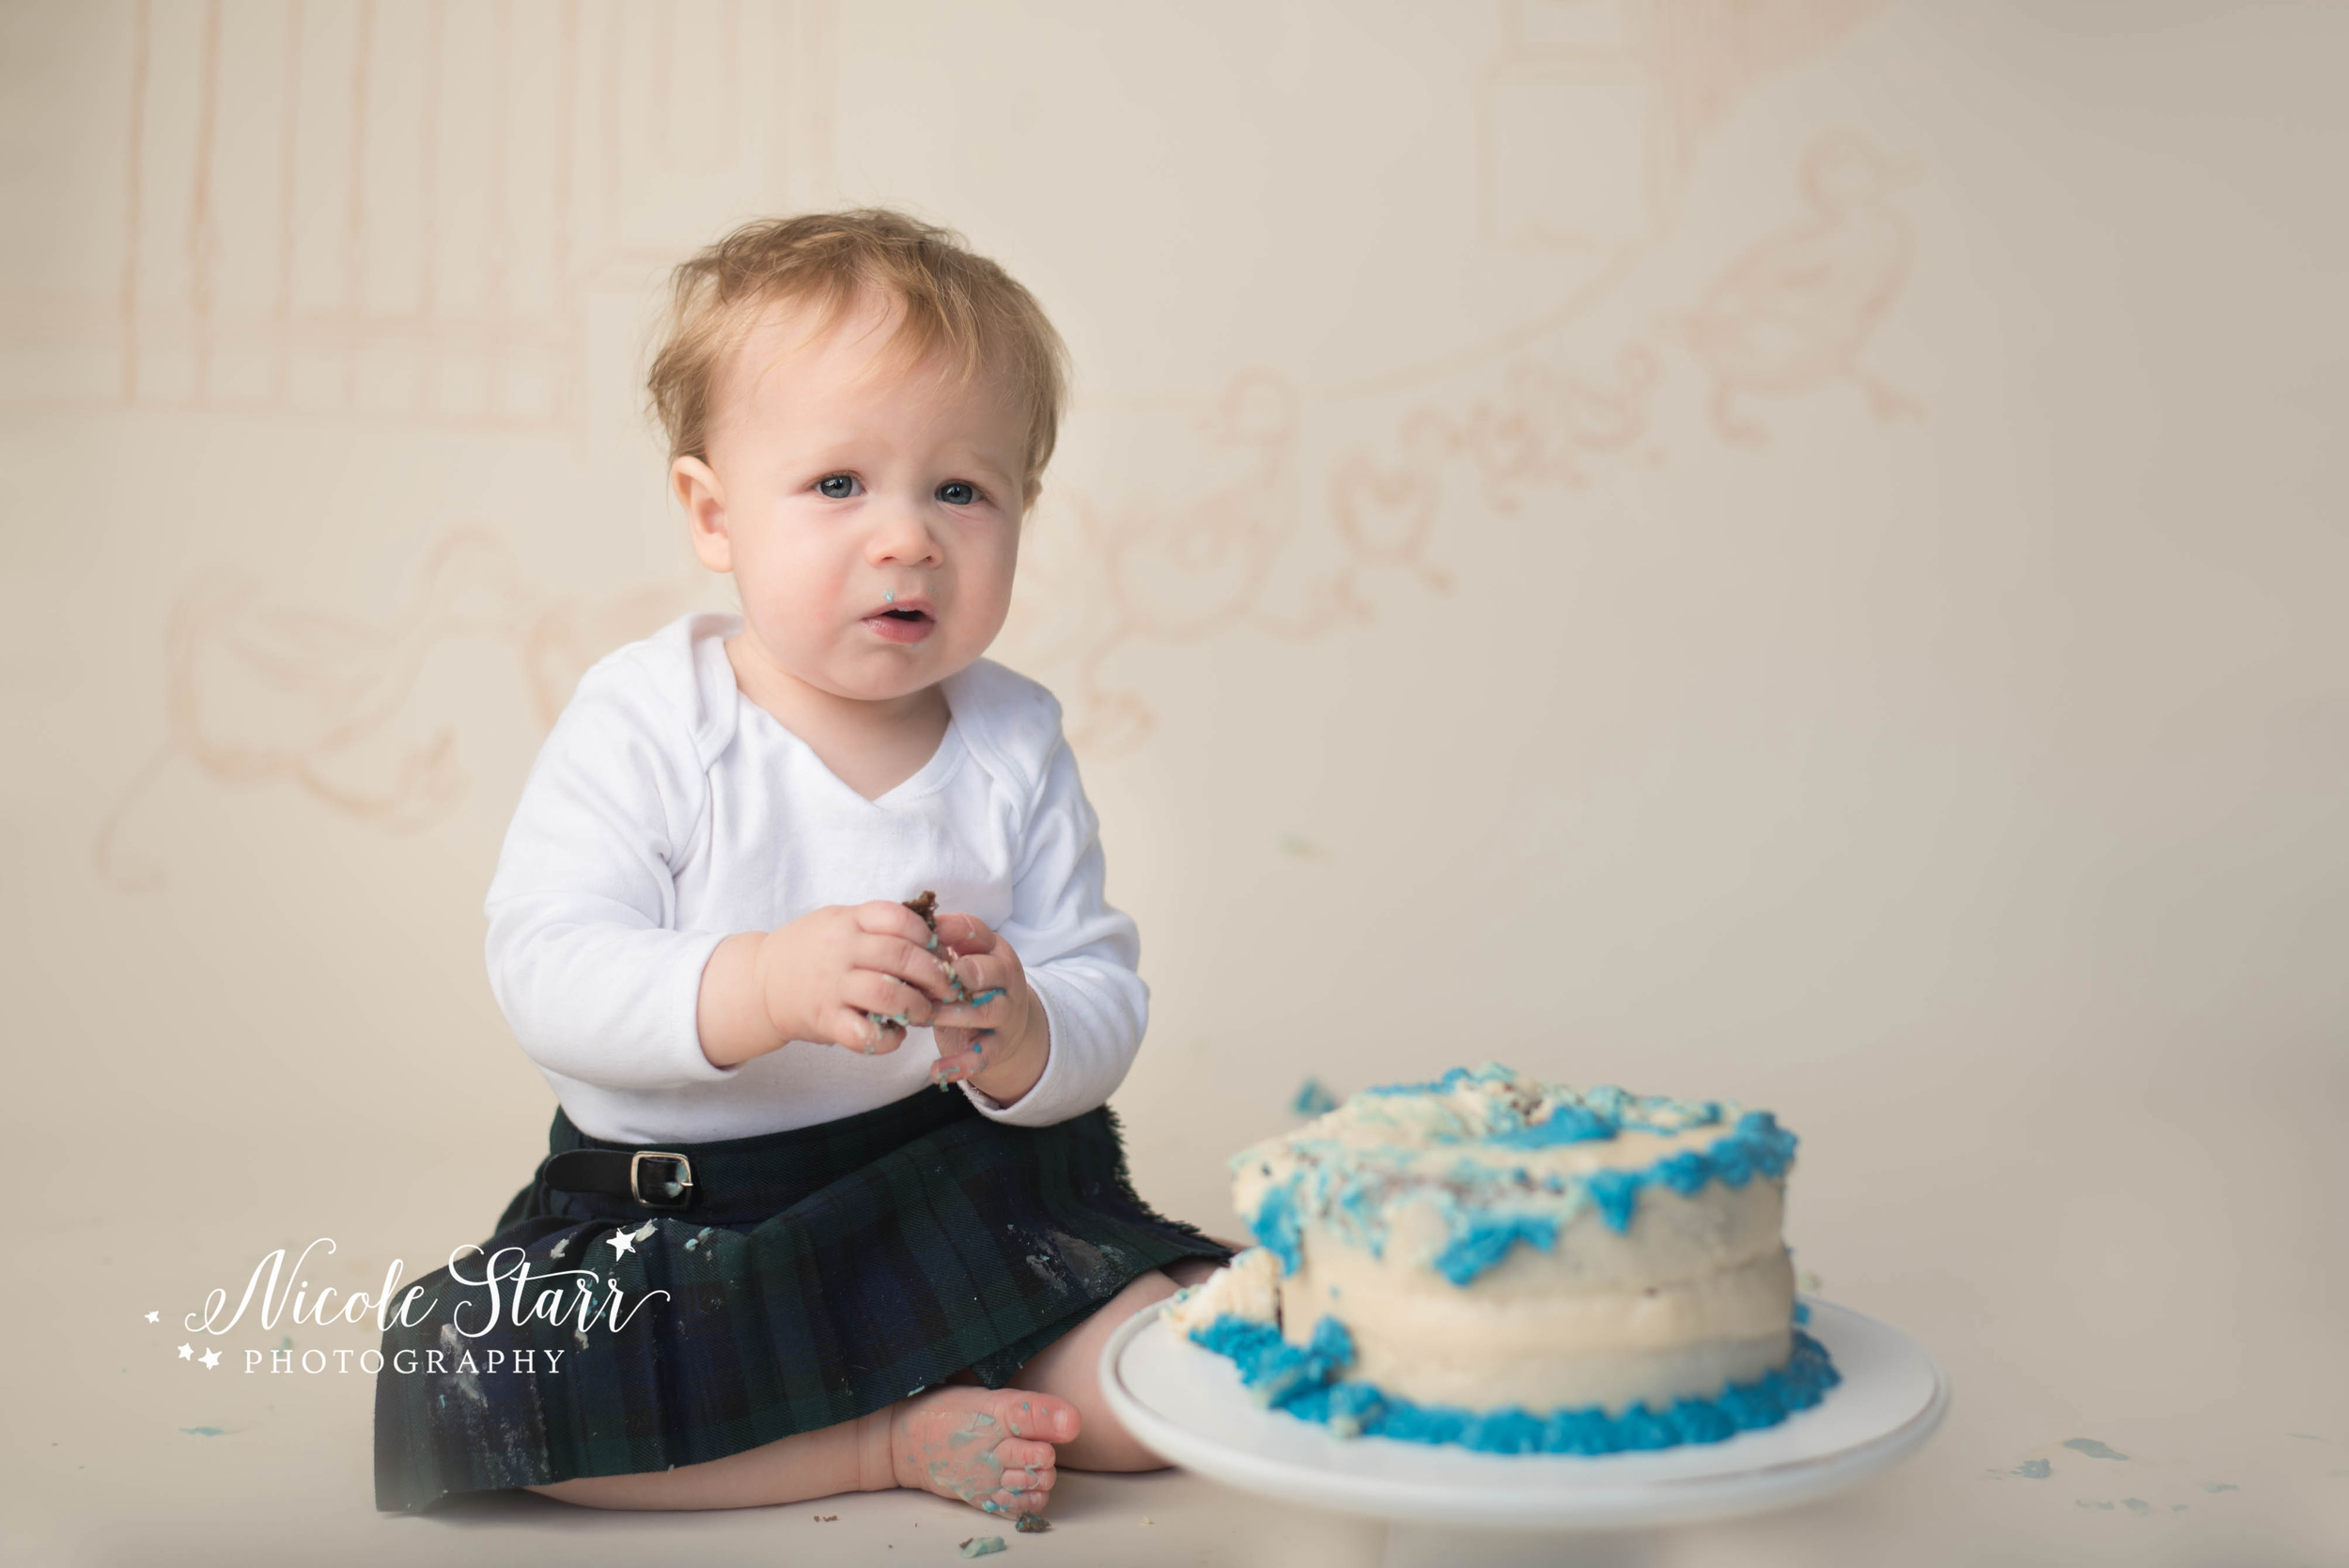 make way for ducklings first birthday cake smash photo session.jpg